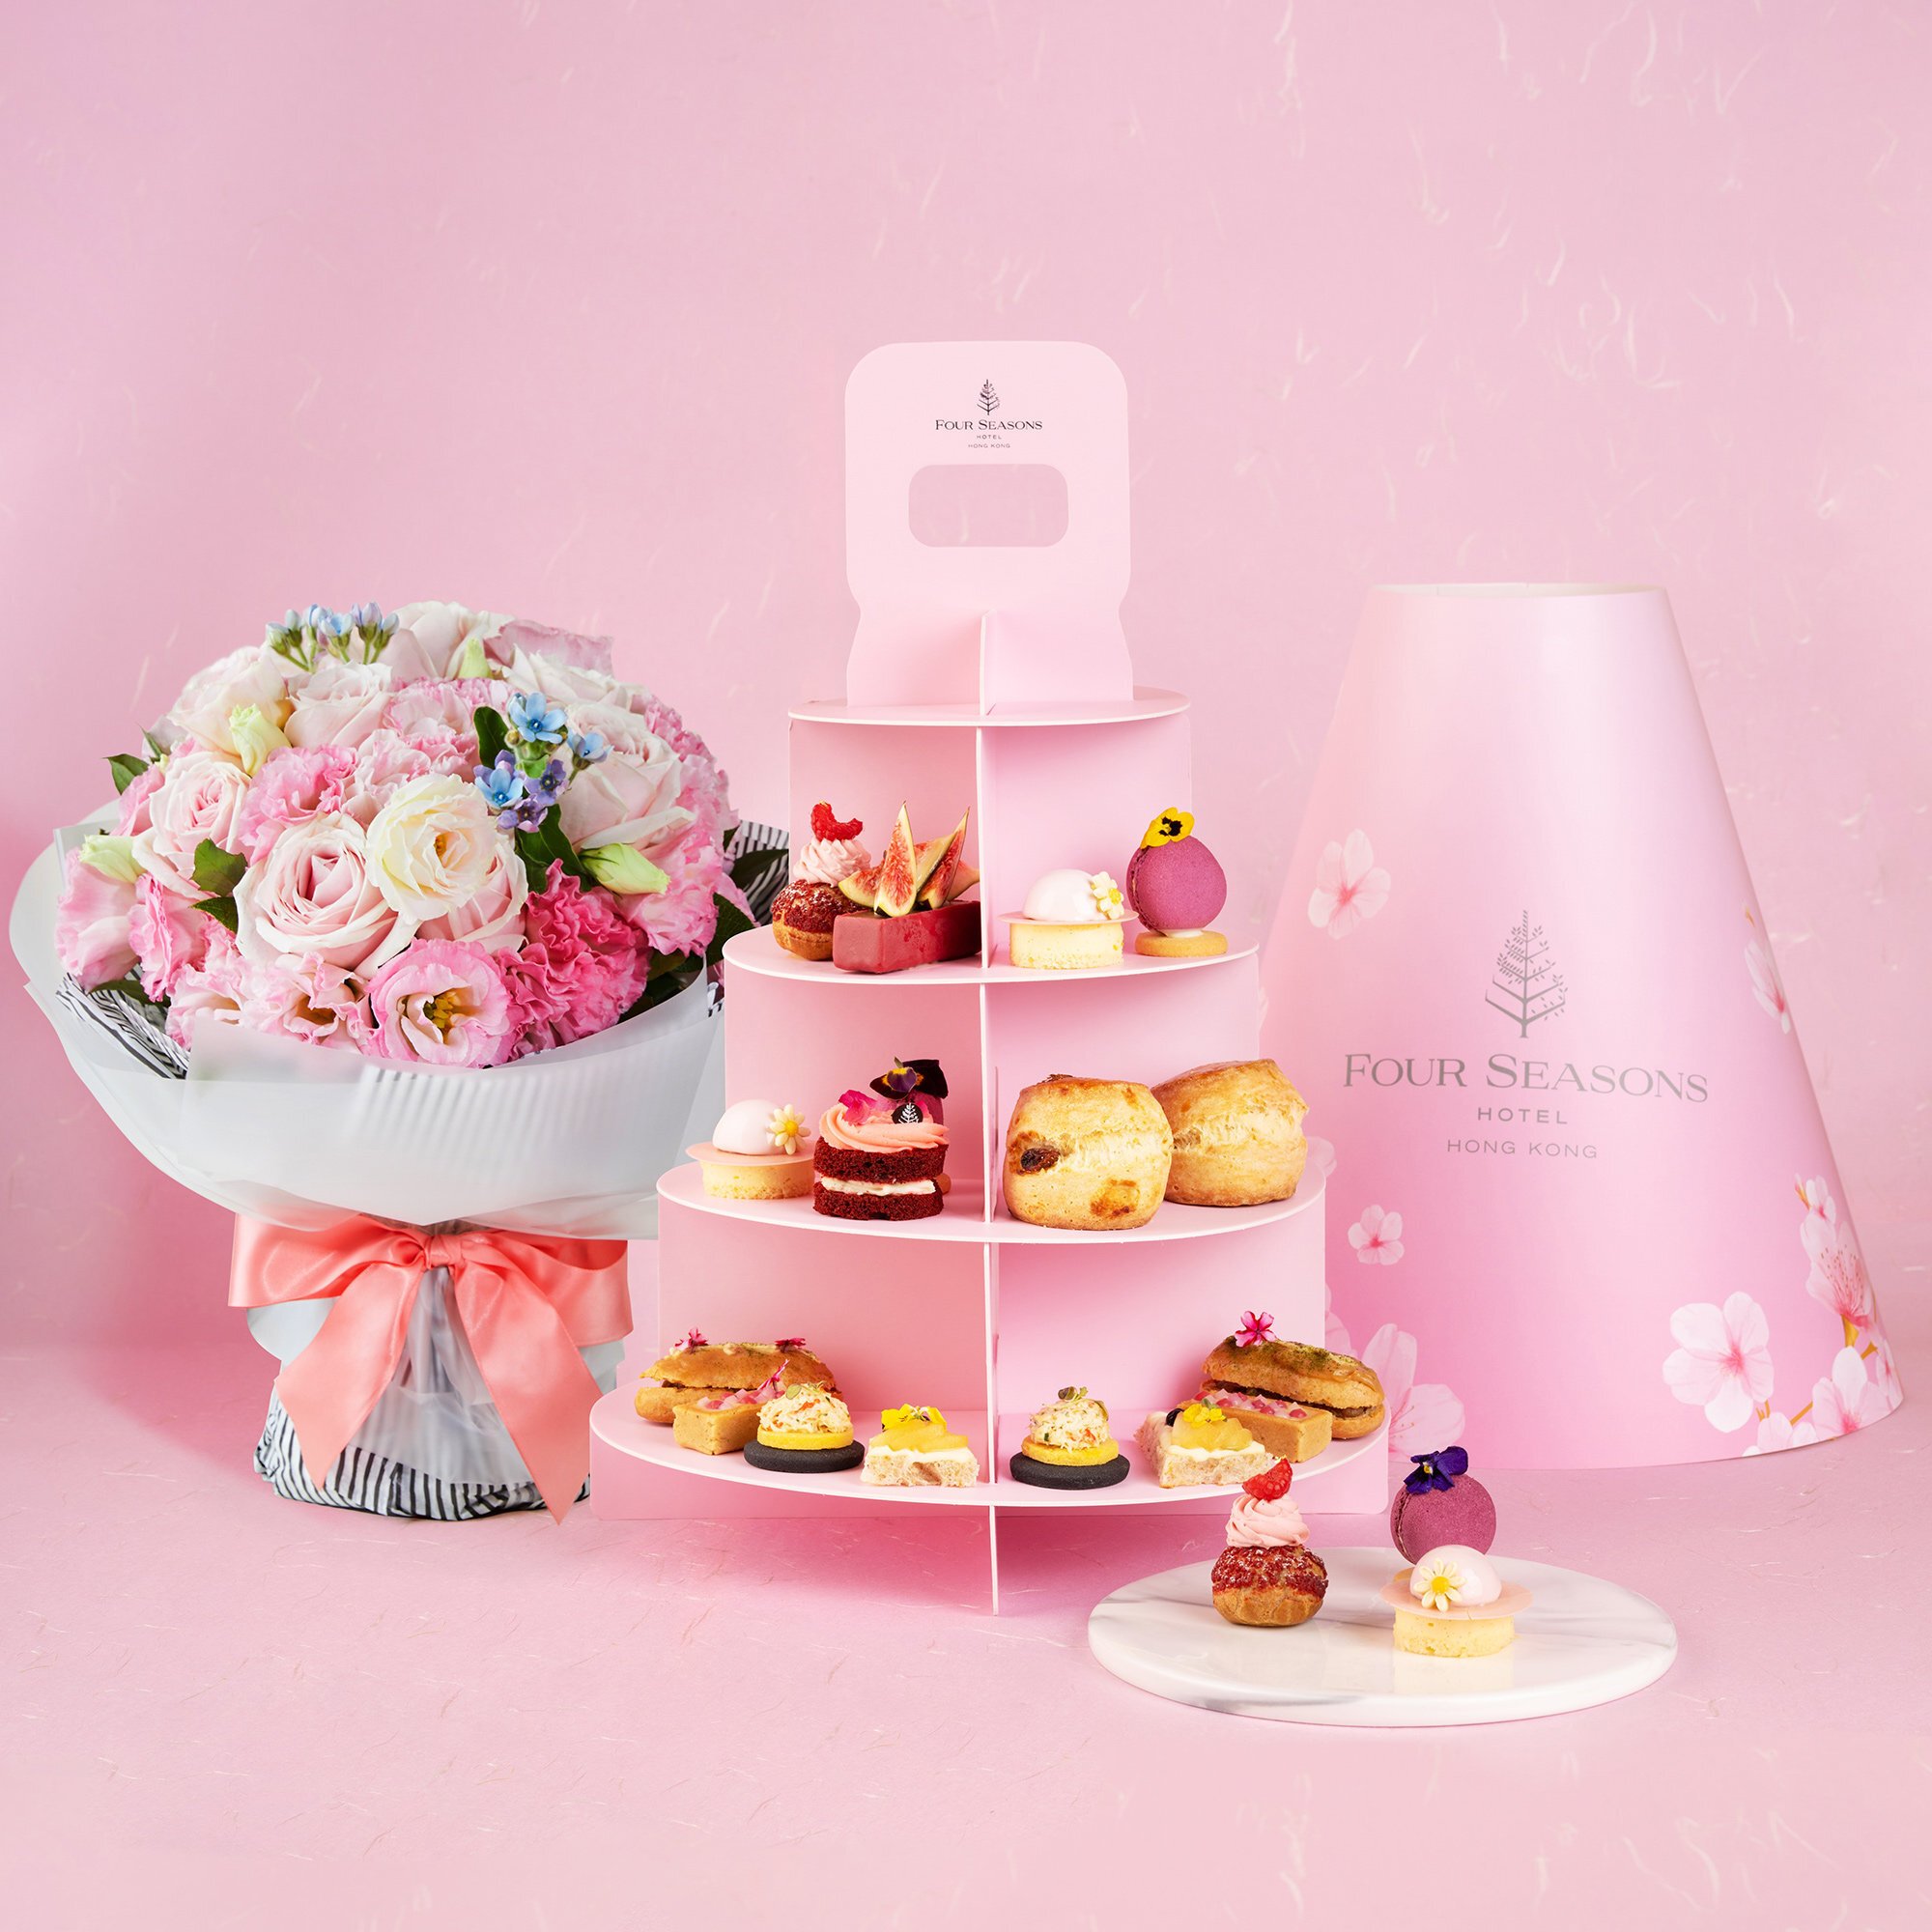 Don’t pink or you’ll miss it – a Mother’s Day gift set that’s great for sharing. Photo: Four Seasons Hong Kong